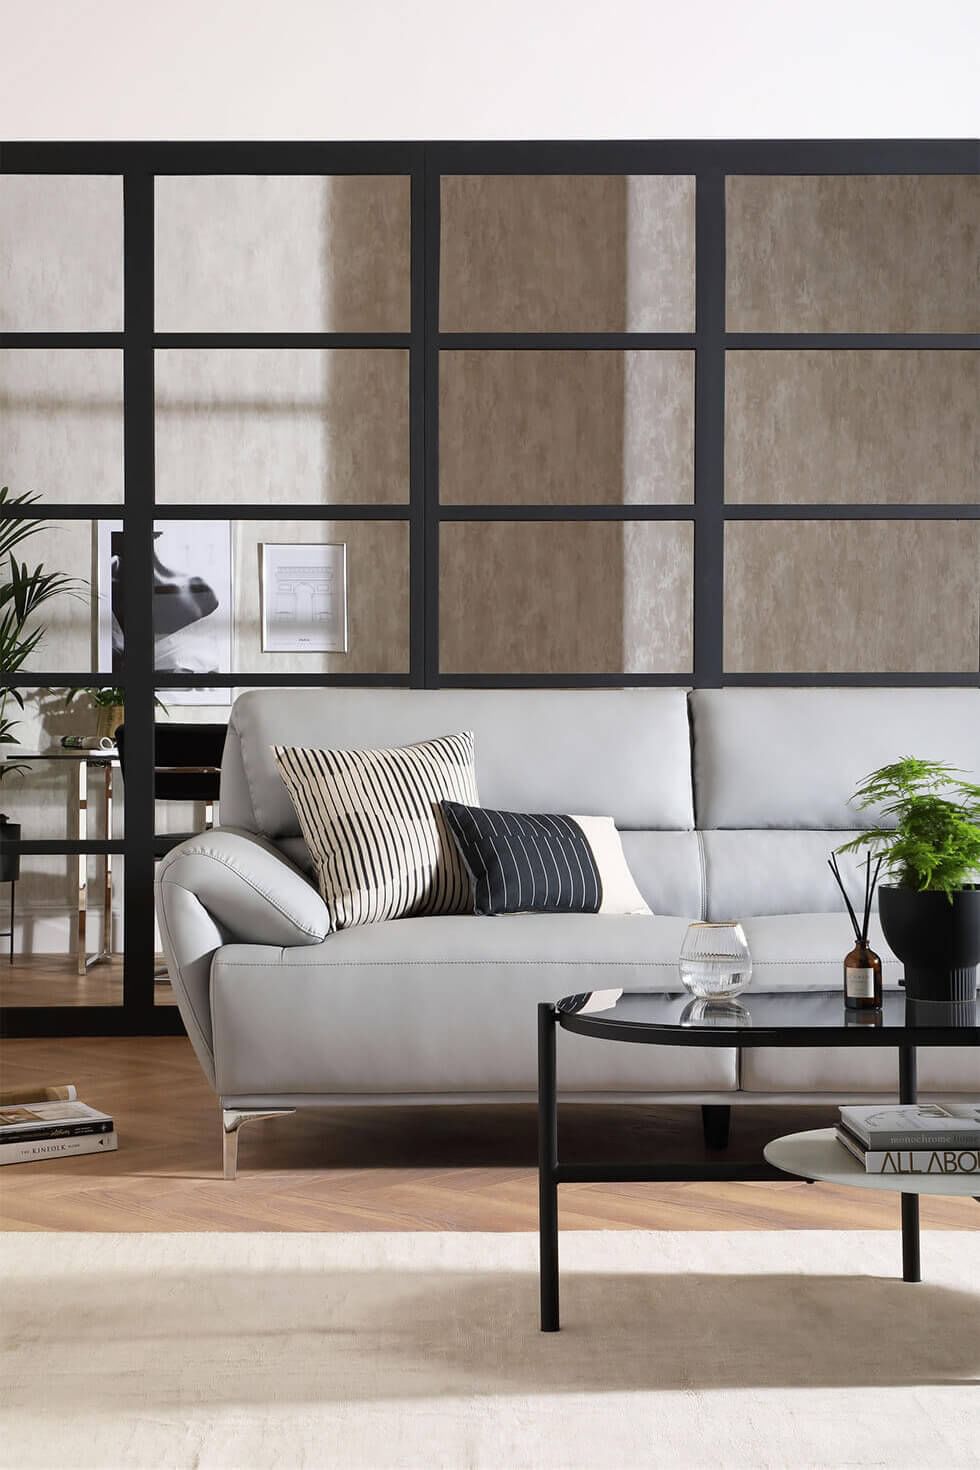 Modern grey living room with leather sofa and Crittall doors